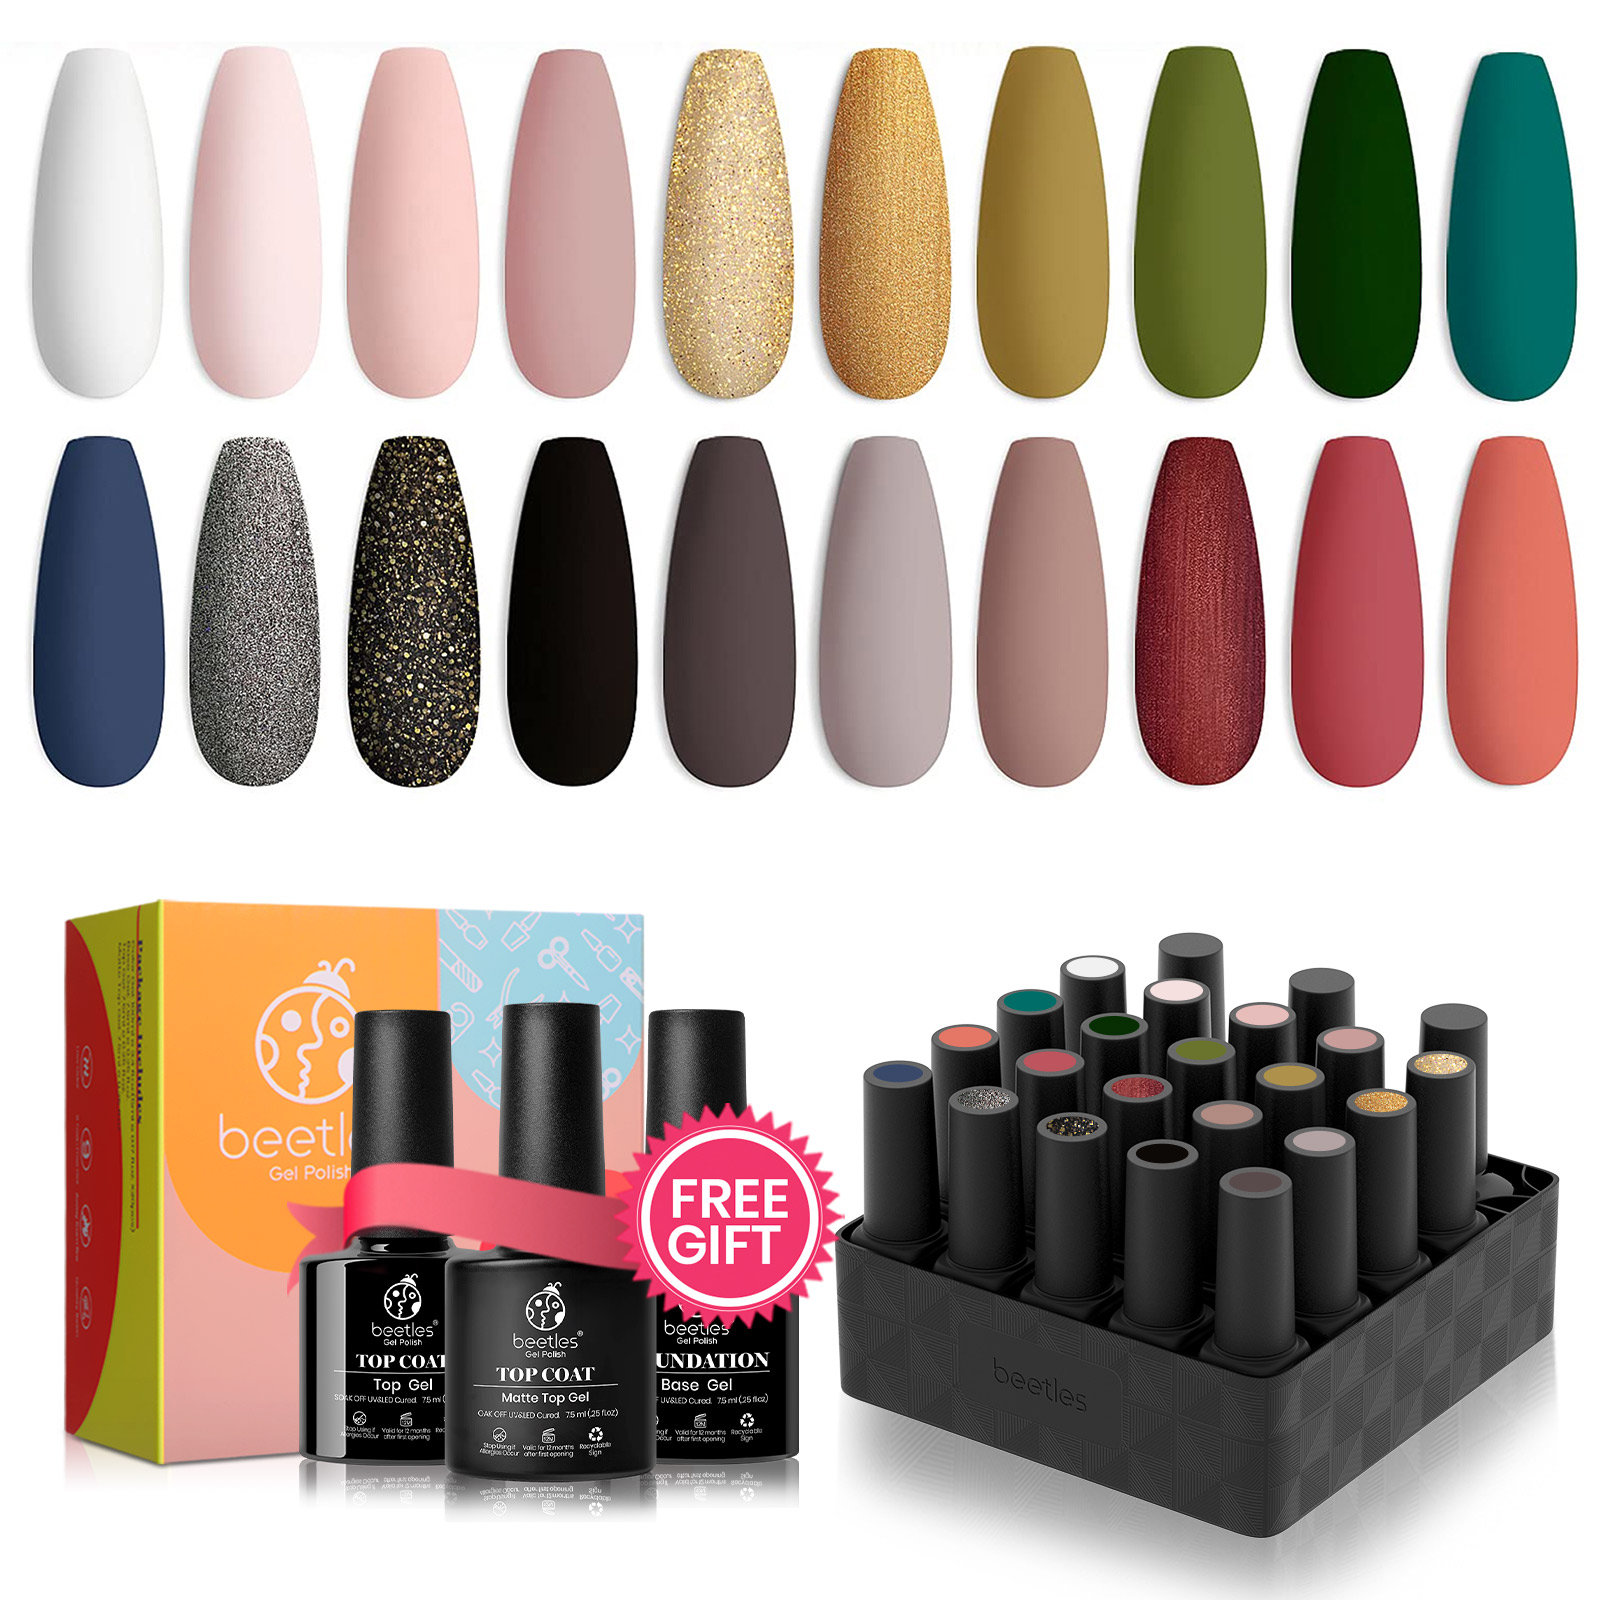 Beetles 20Pcs Gel Nail Polish Kit, with Glossy & Matte Top Coat and Base Coat- Lucky Tarot Collection, Popular White Nude Grey Green Nail Art Solid Glitters Colors Soak Off UV Gel Polish